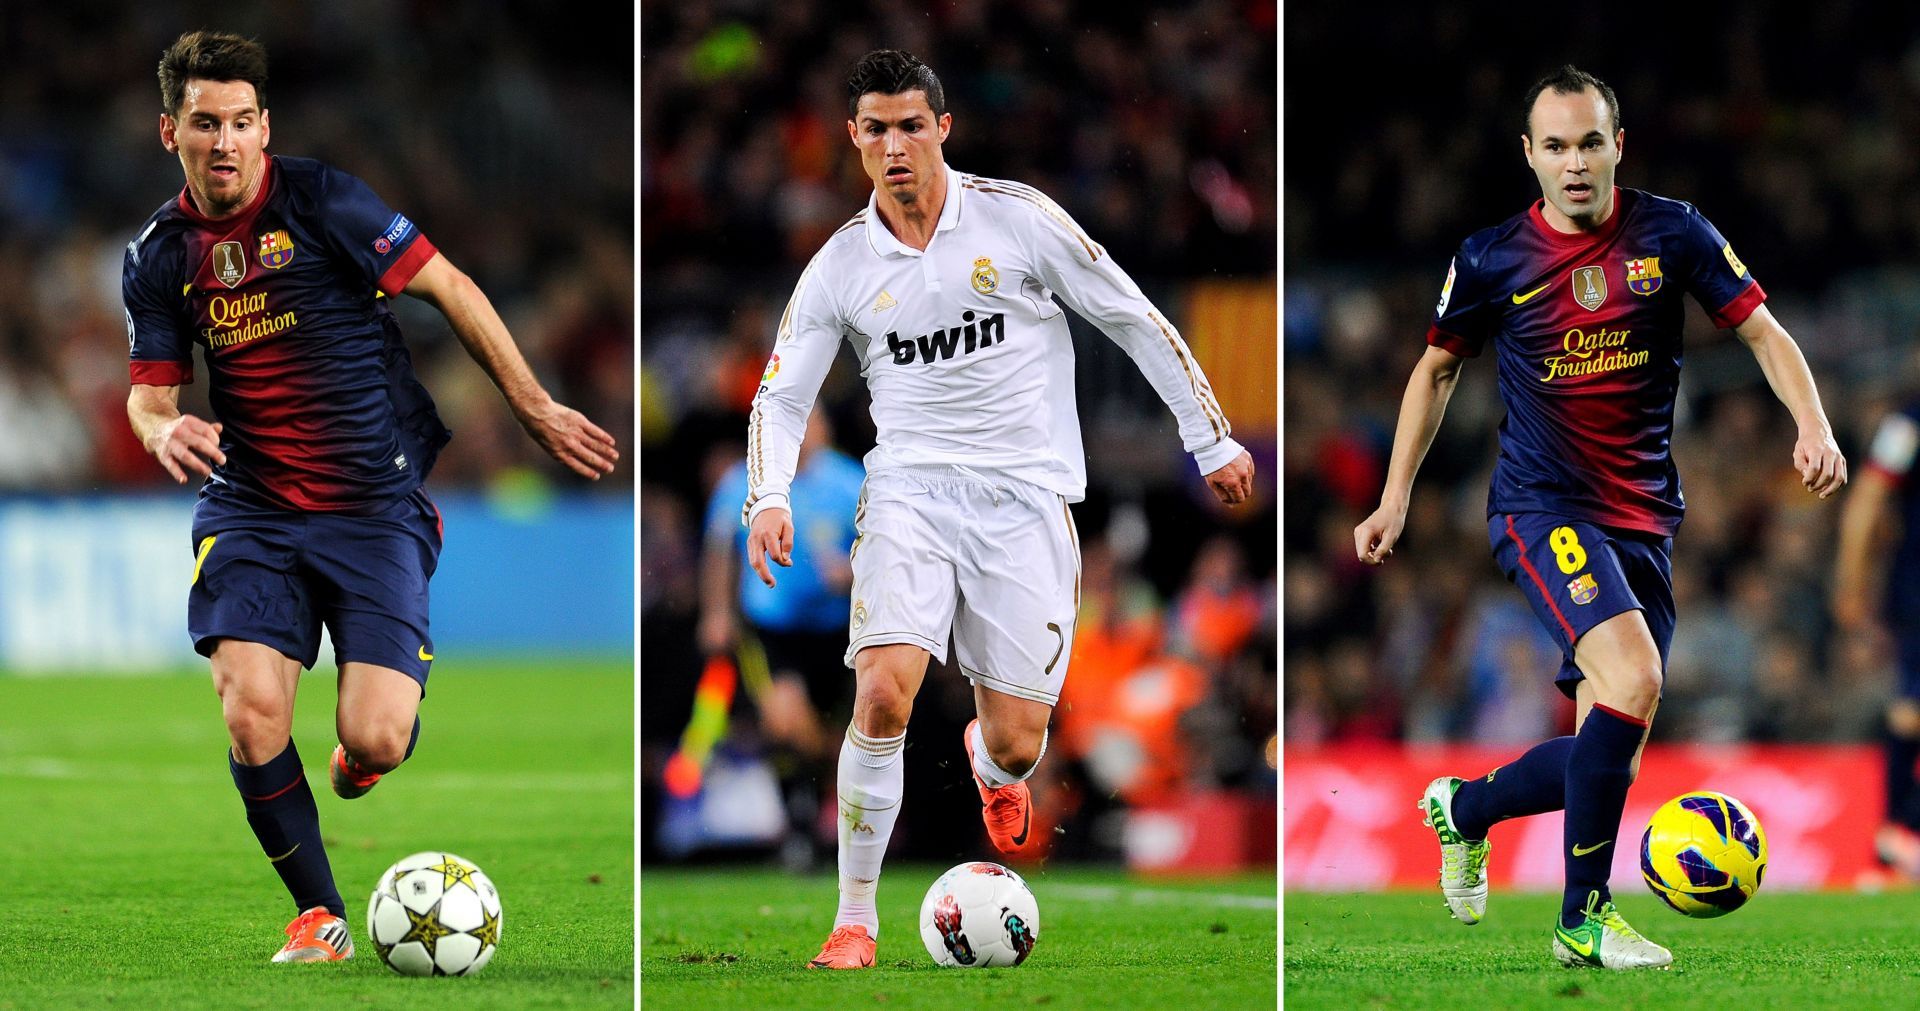 Lionel Messi, Cristiano Ronaldo and Andres Iniesta (from left to right) have been top performers in the El Clasico in recent years.